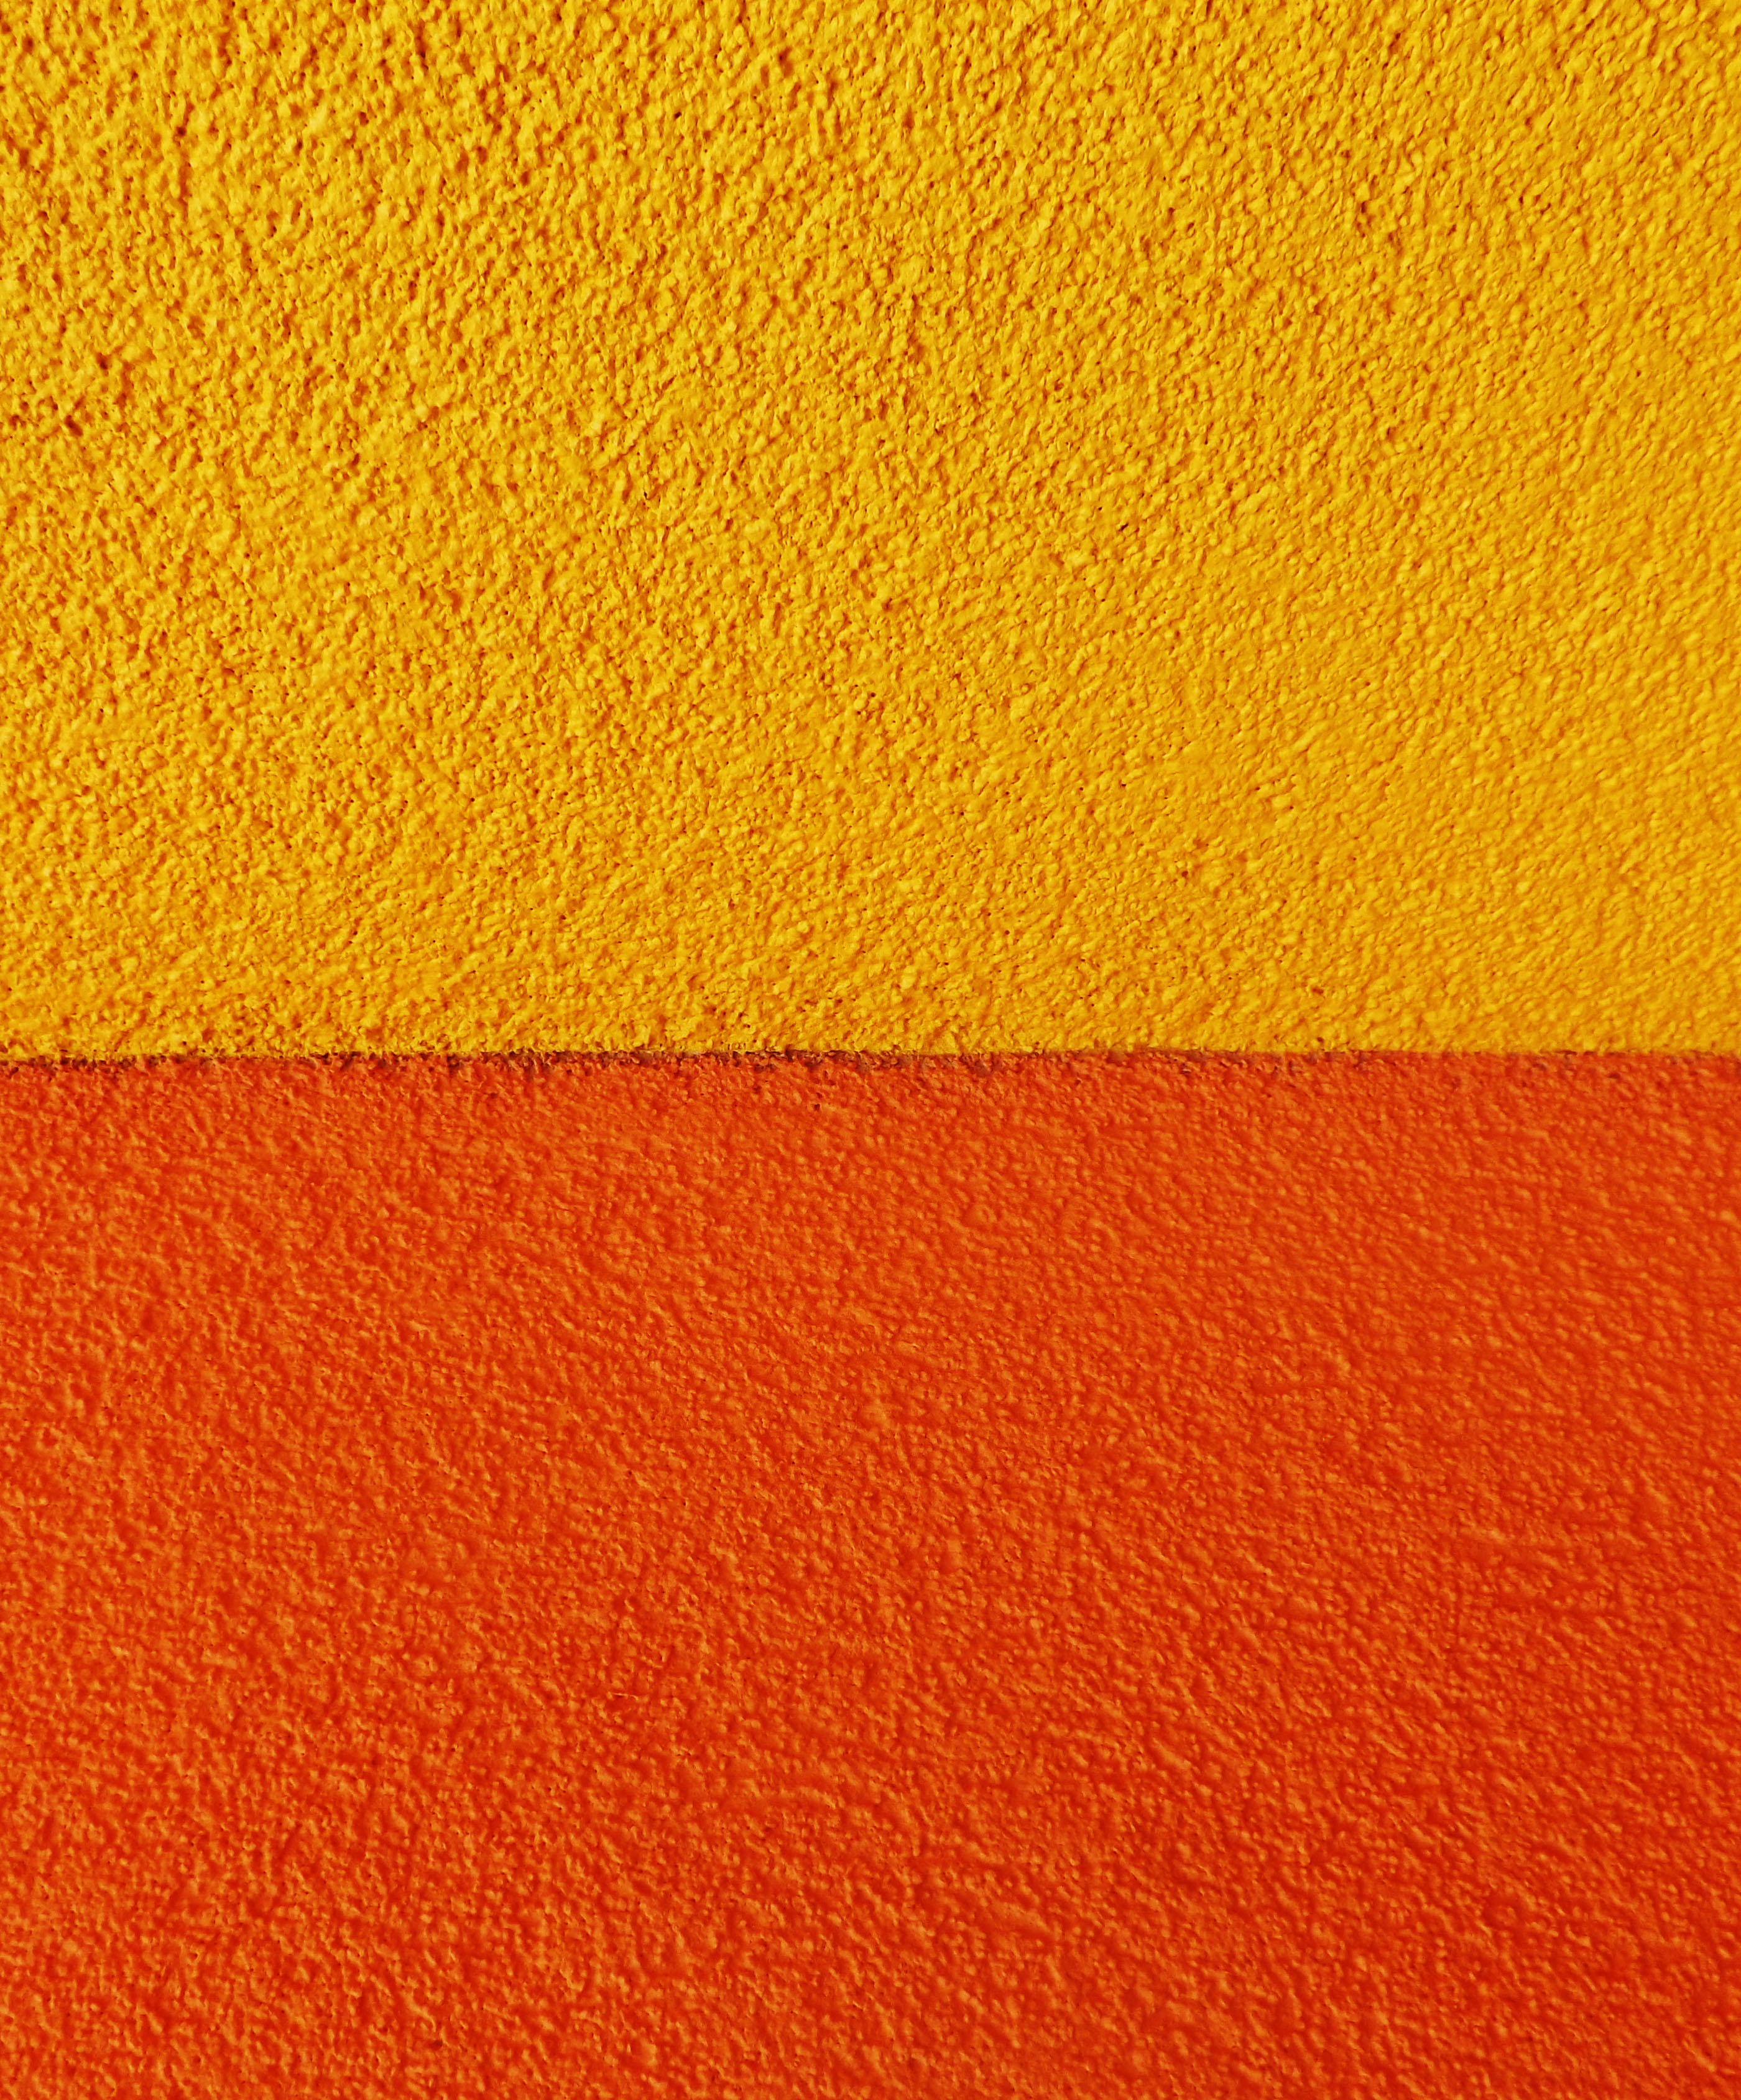 68643 free download Orange wallpapers for phone,  Orange images and screensavers for mobile